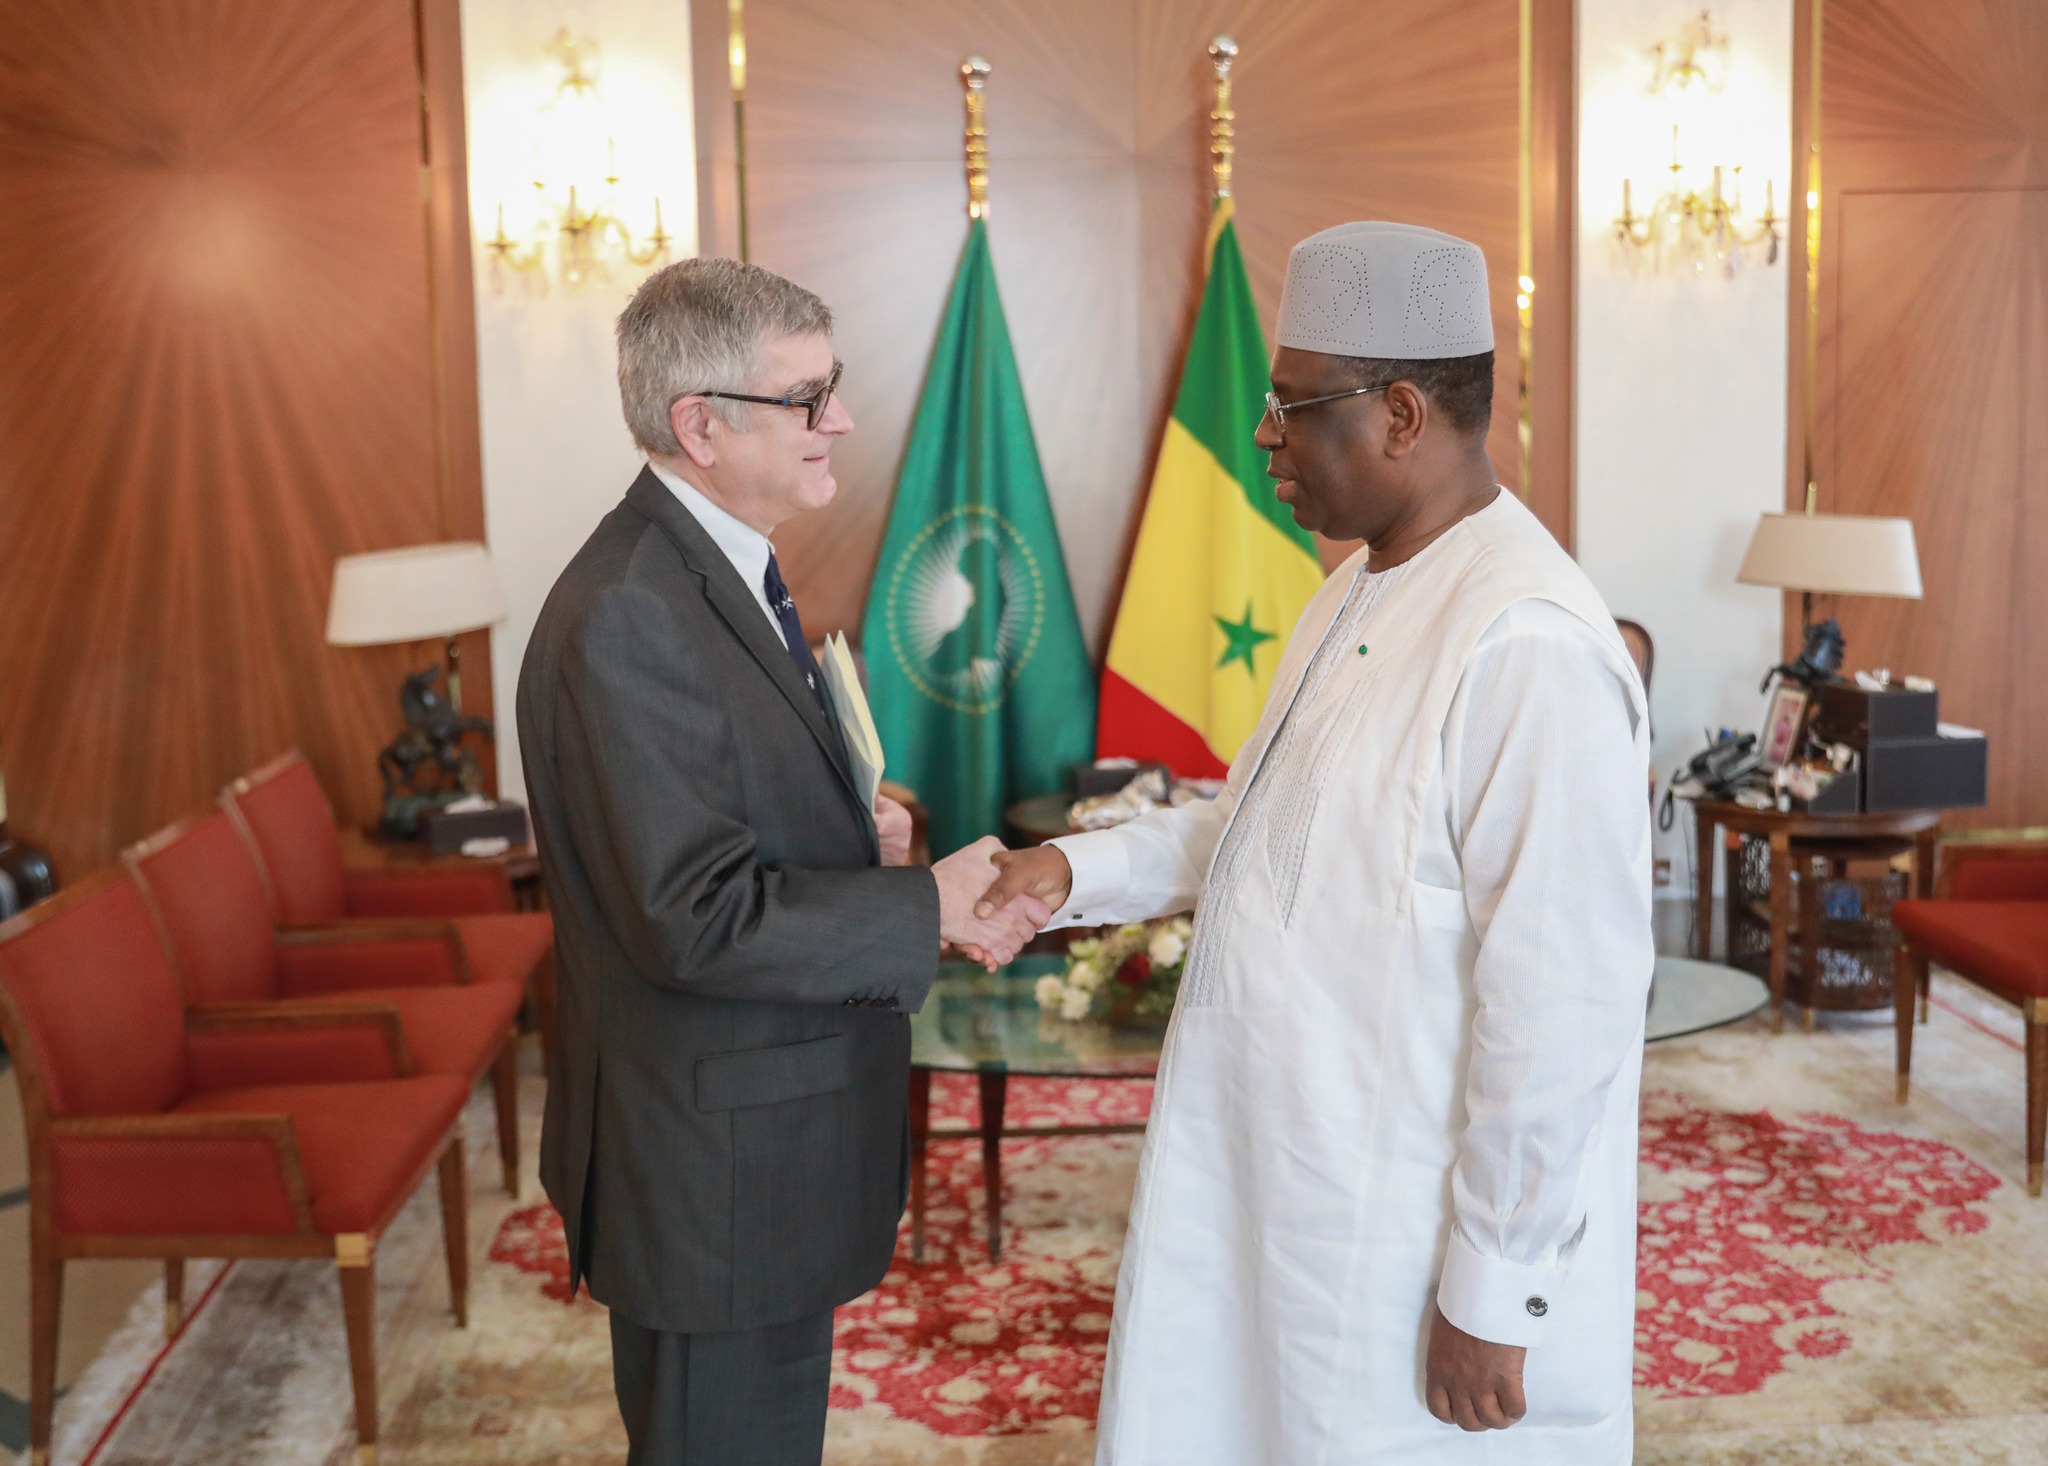 The Ambassador of the Sovereign Order of Malta to Senegal presents his letters of credence